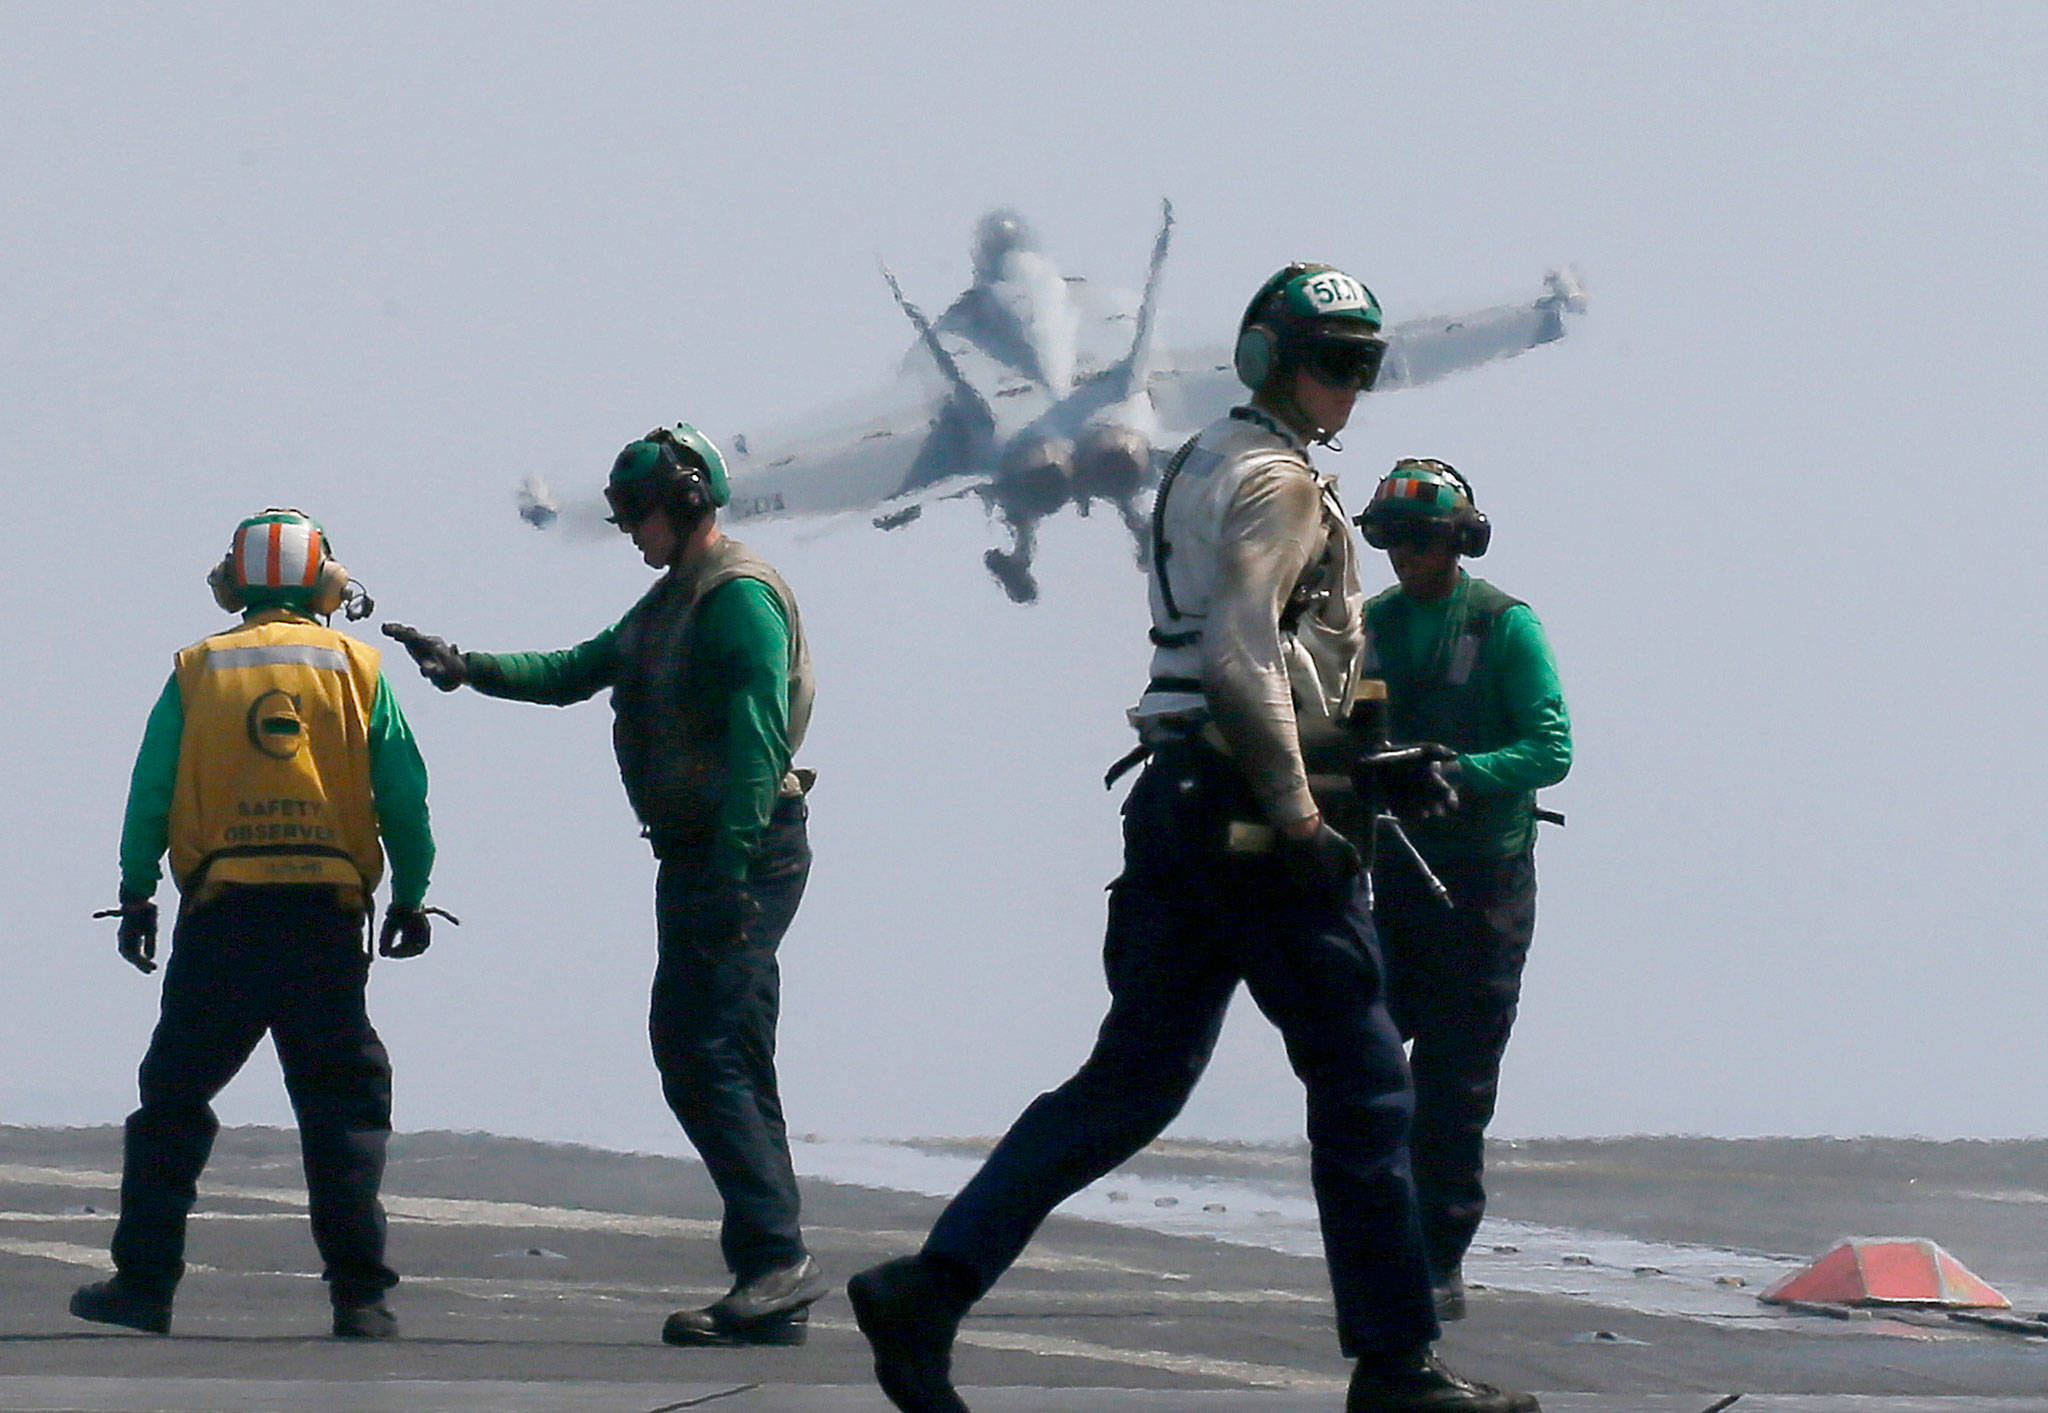 A U.S. Navy F-18 fighter jet takes off from the U.S. Navy aircraft carrier USS Carl Vinson for a patrol off the disputed South China Sea on March 3. (AP Photo/Bullit Marquez)